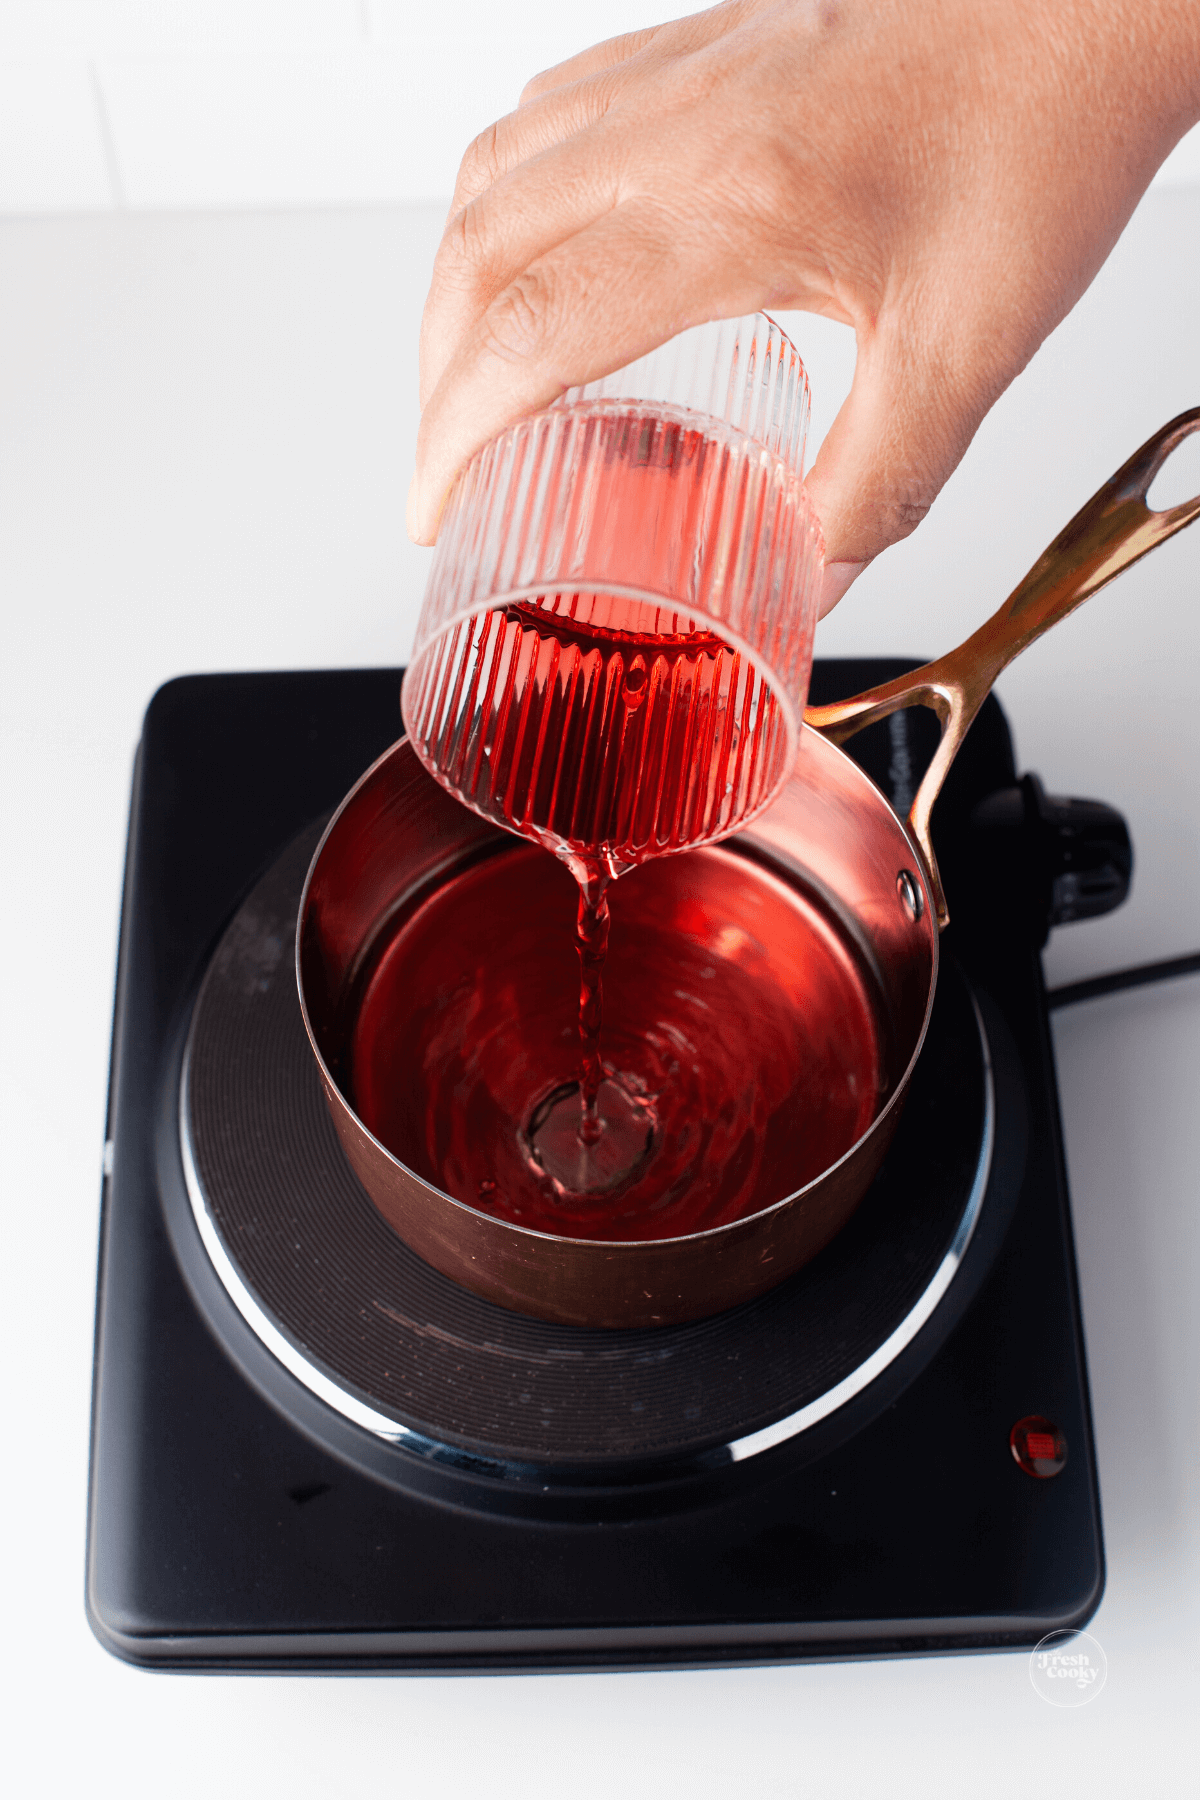 Pouring pomegranate juice into sauce pan.